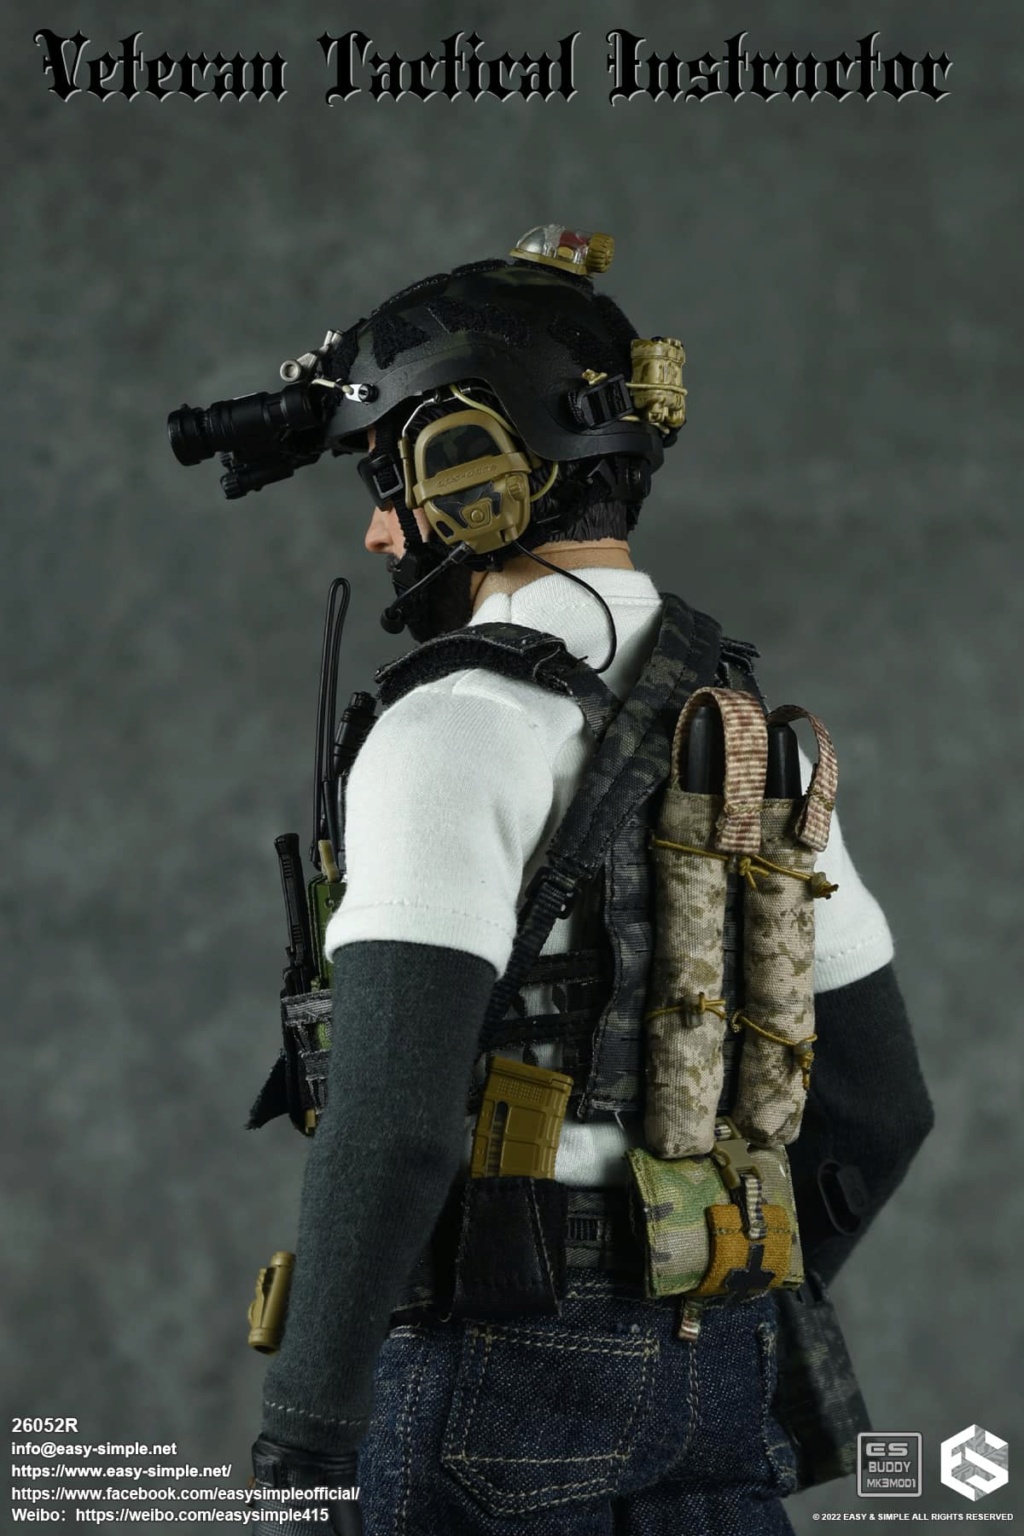 ModernMilitary - NEW PRODUCT: Easy&Simple: 26052R 1/6 Scale Veteran Tactical Instructor 31159410